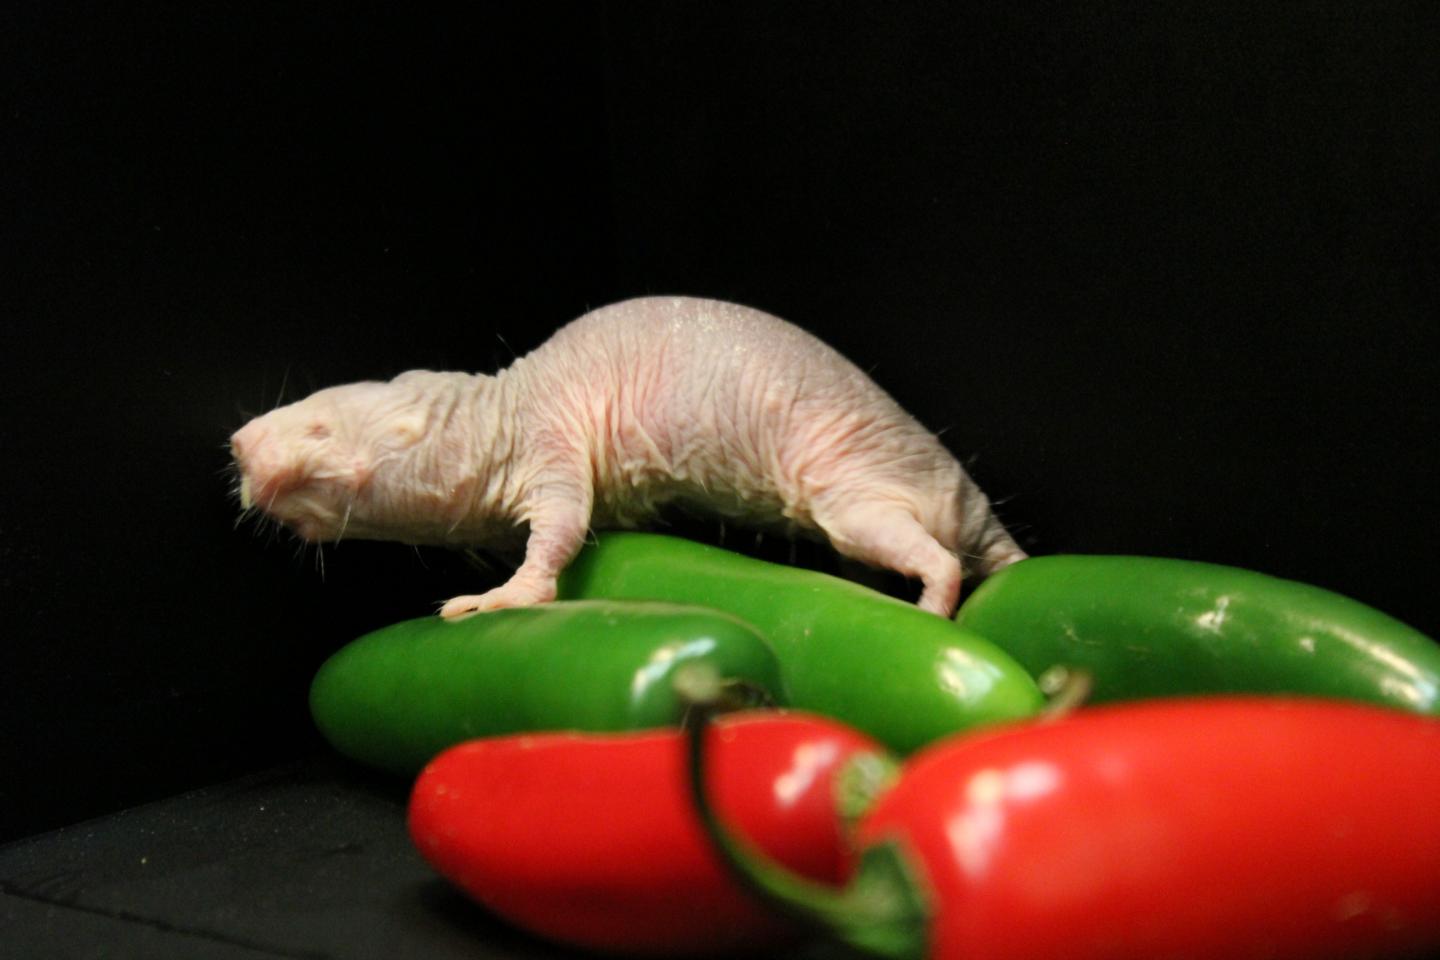 Naked Mole Rat Climbs Over Chili Peppers